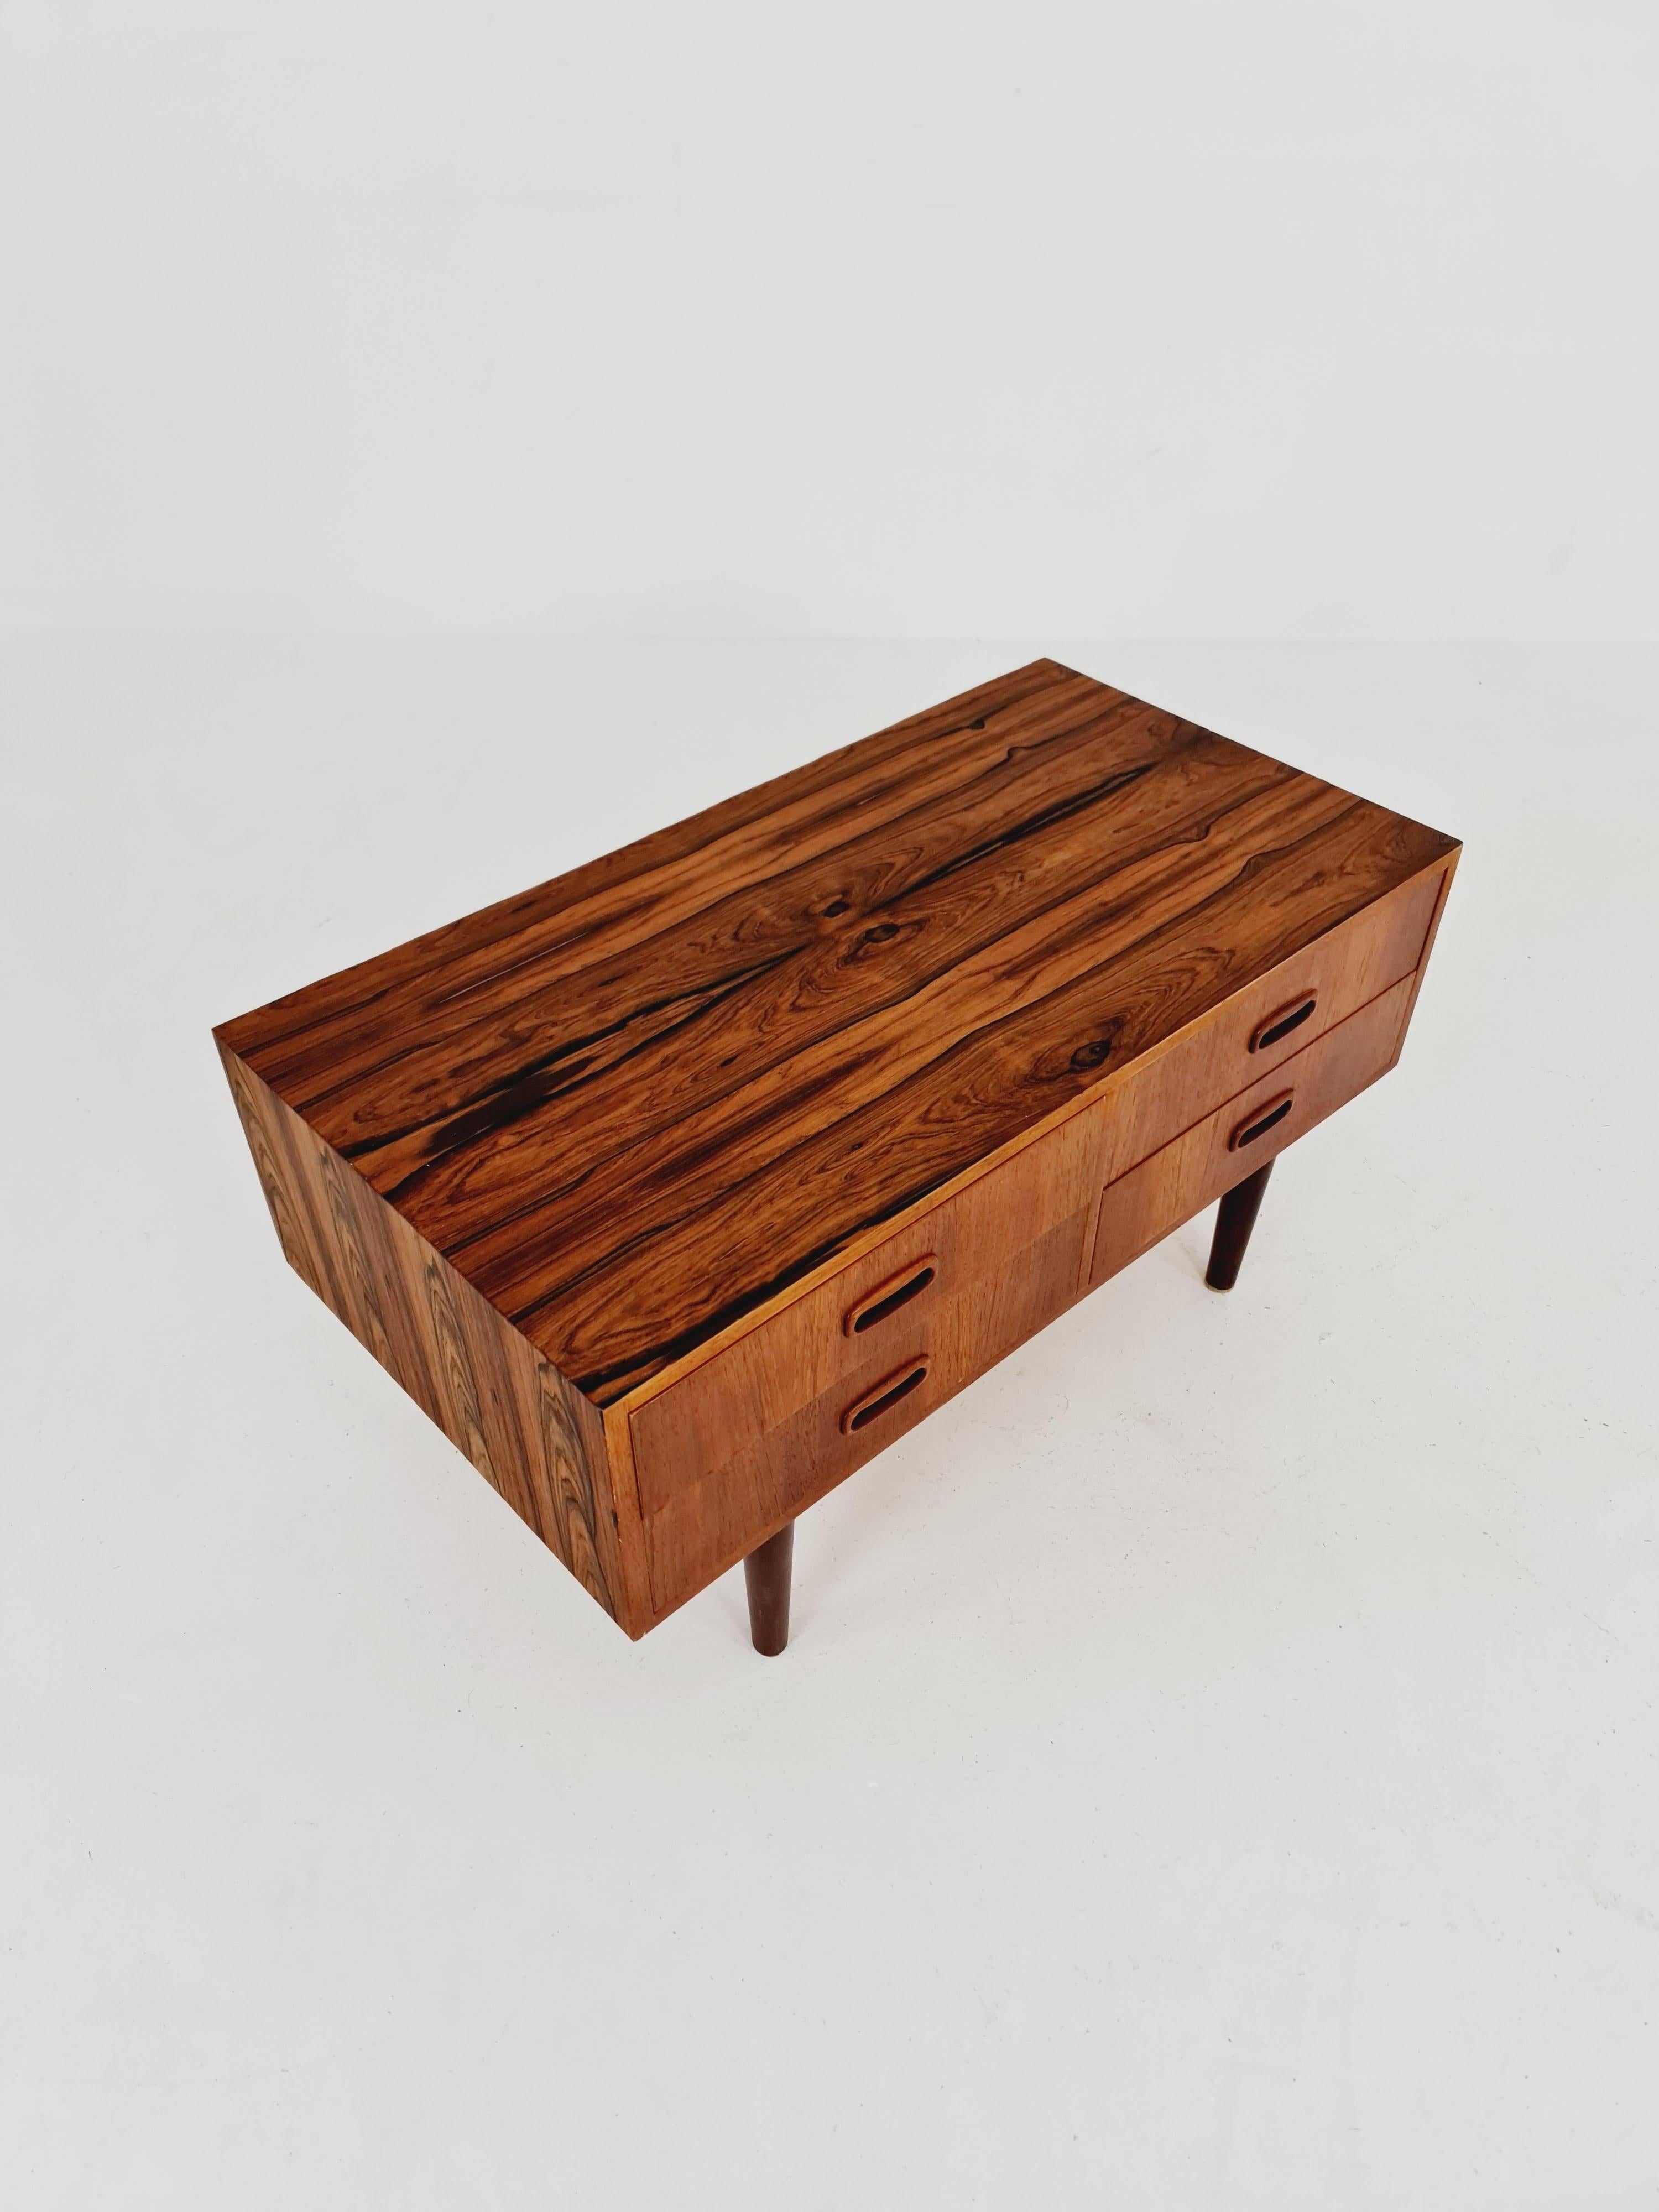 Rosewood Rare Mid Century Modern Danish rosewood Sideboard with drawers, 1950s For Sale